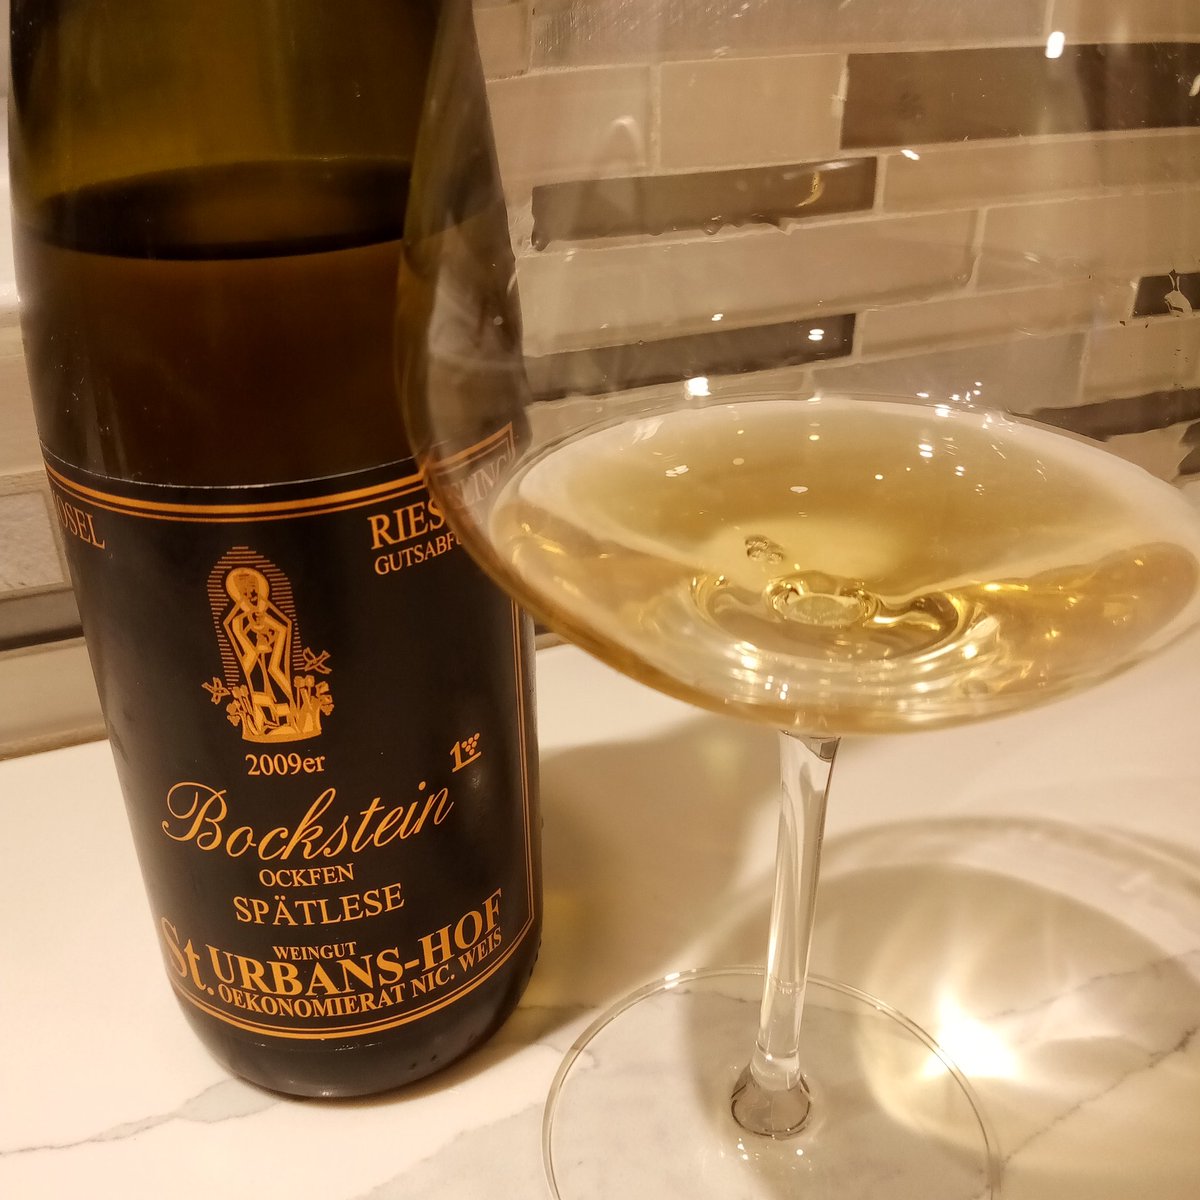 A perfect pairing of Spicy Honey Garlic Chicken @HBHarvest with a beautifully aged 2009 Ockfener Bockstein. @grapelive @RussellVine1981 @FoodieWineLover @SuzyQlovesWine @VncentLIFE #Mosel #wine